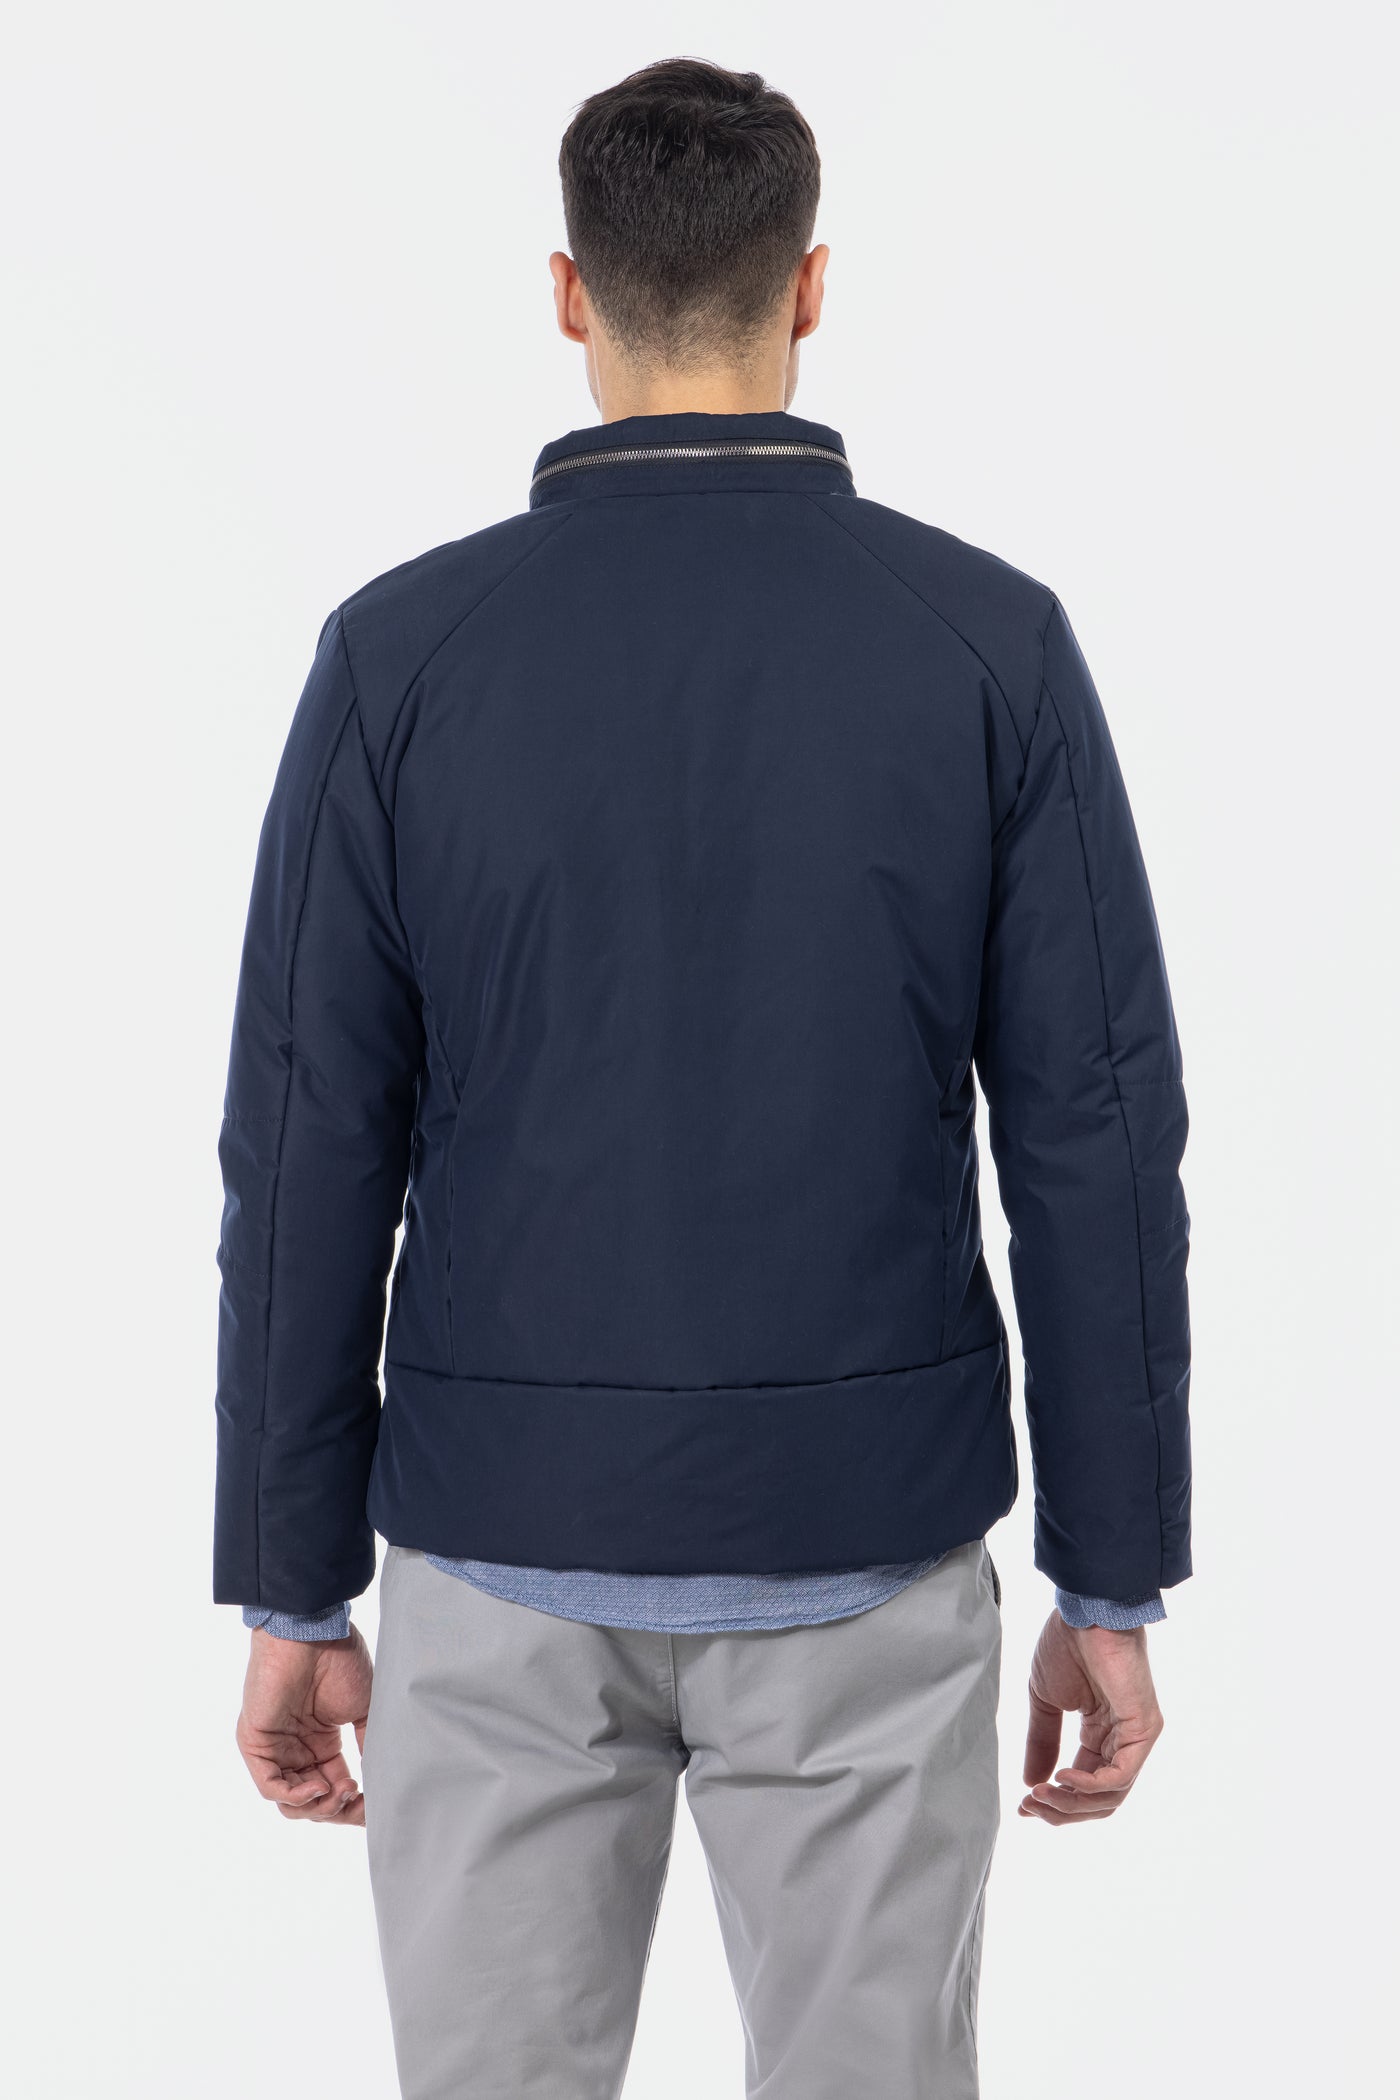 Waterproof Solid Patted Navy Sweater Jacket